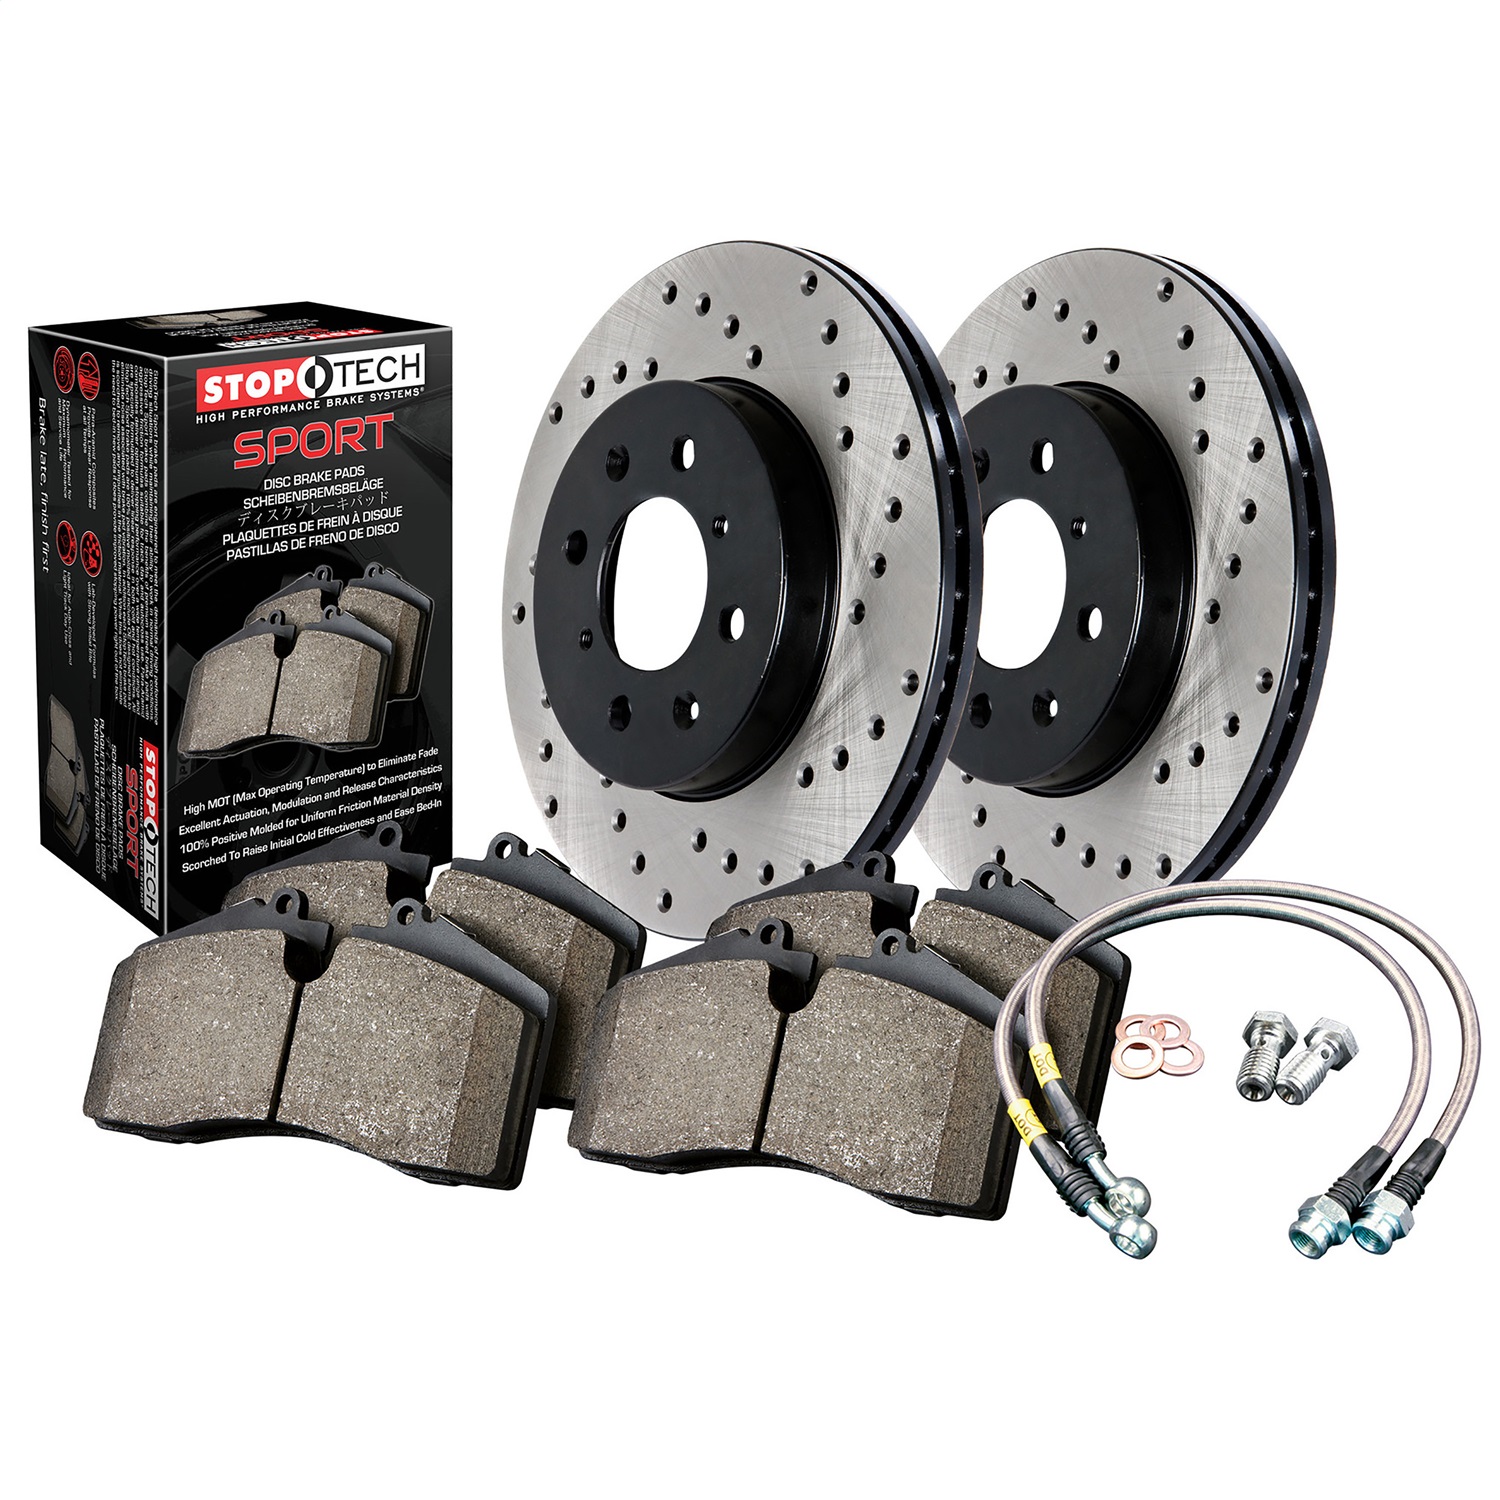 StopTech 979.61001R Sport Disc Brake Kit w/Cross-Drilled Rotors Fits Mustang